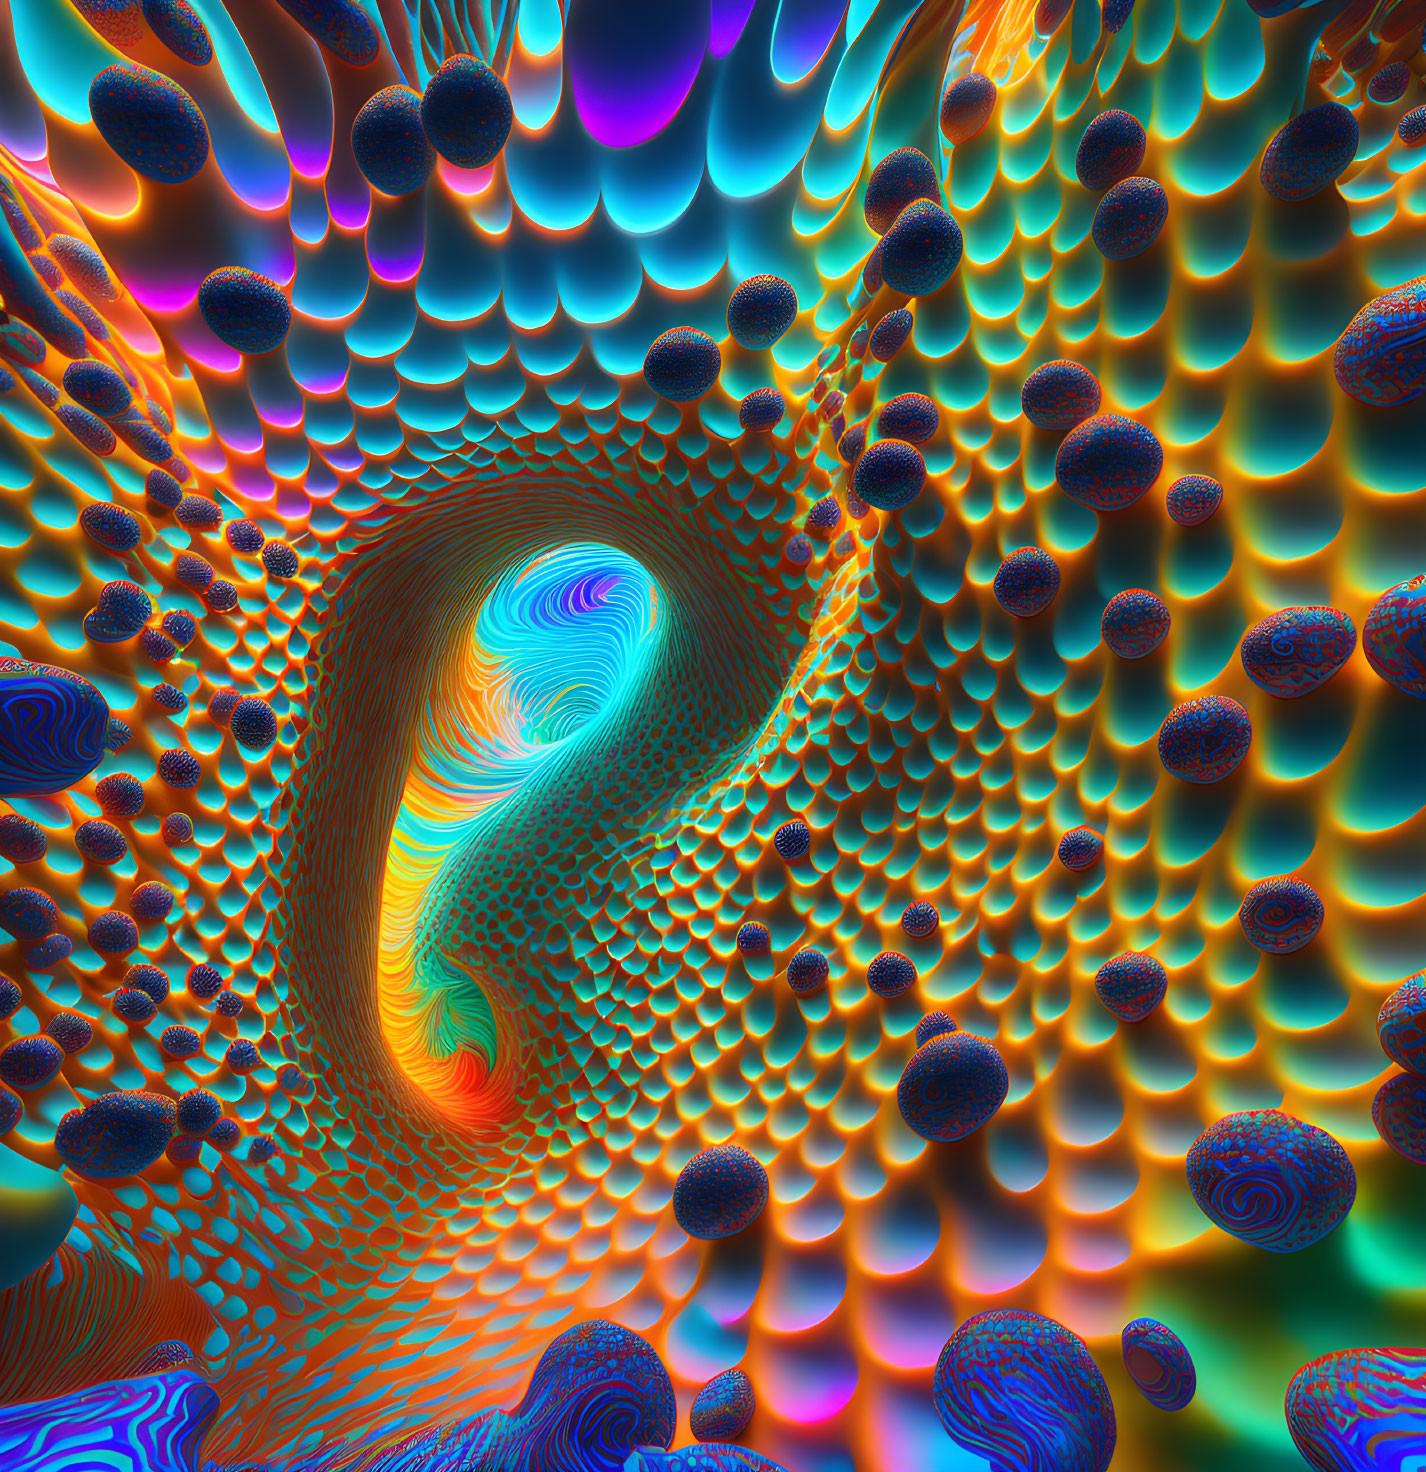 Colorful Psychedelic Digital Art: Swirling Tunnel and Textured Spheres in Blues, Or